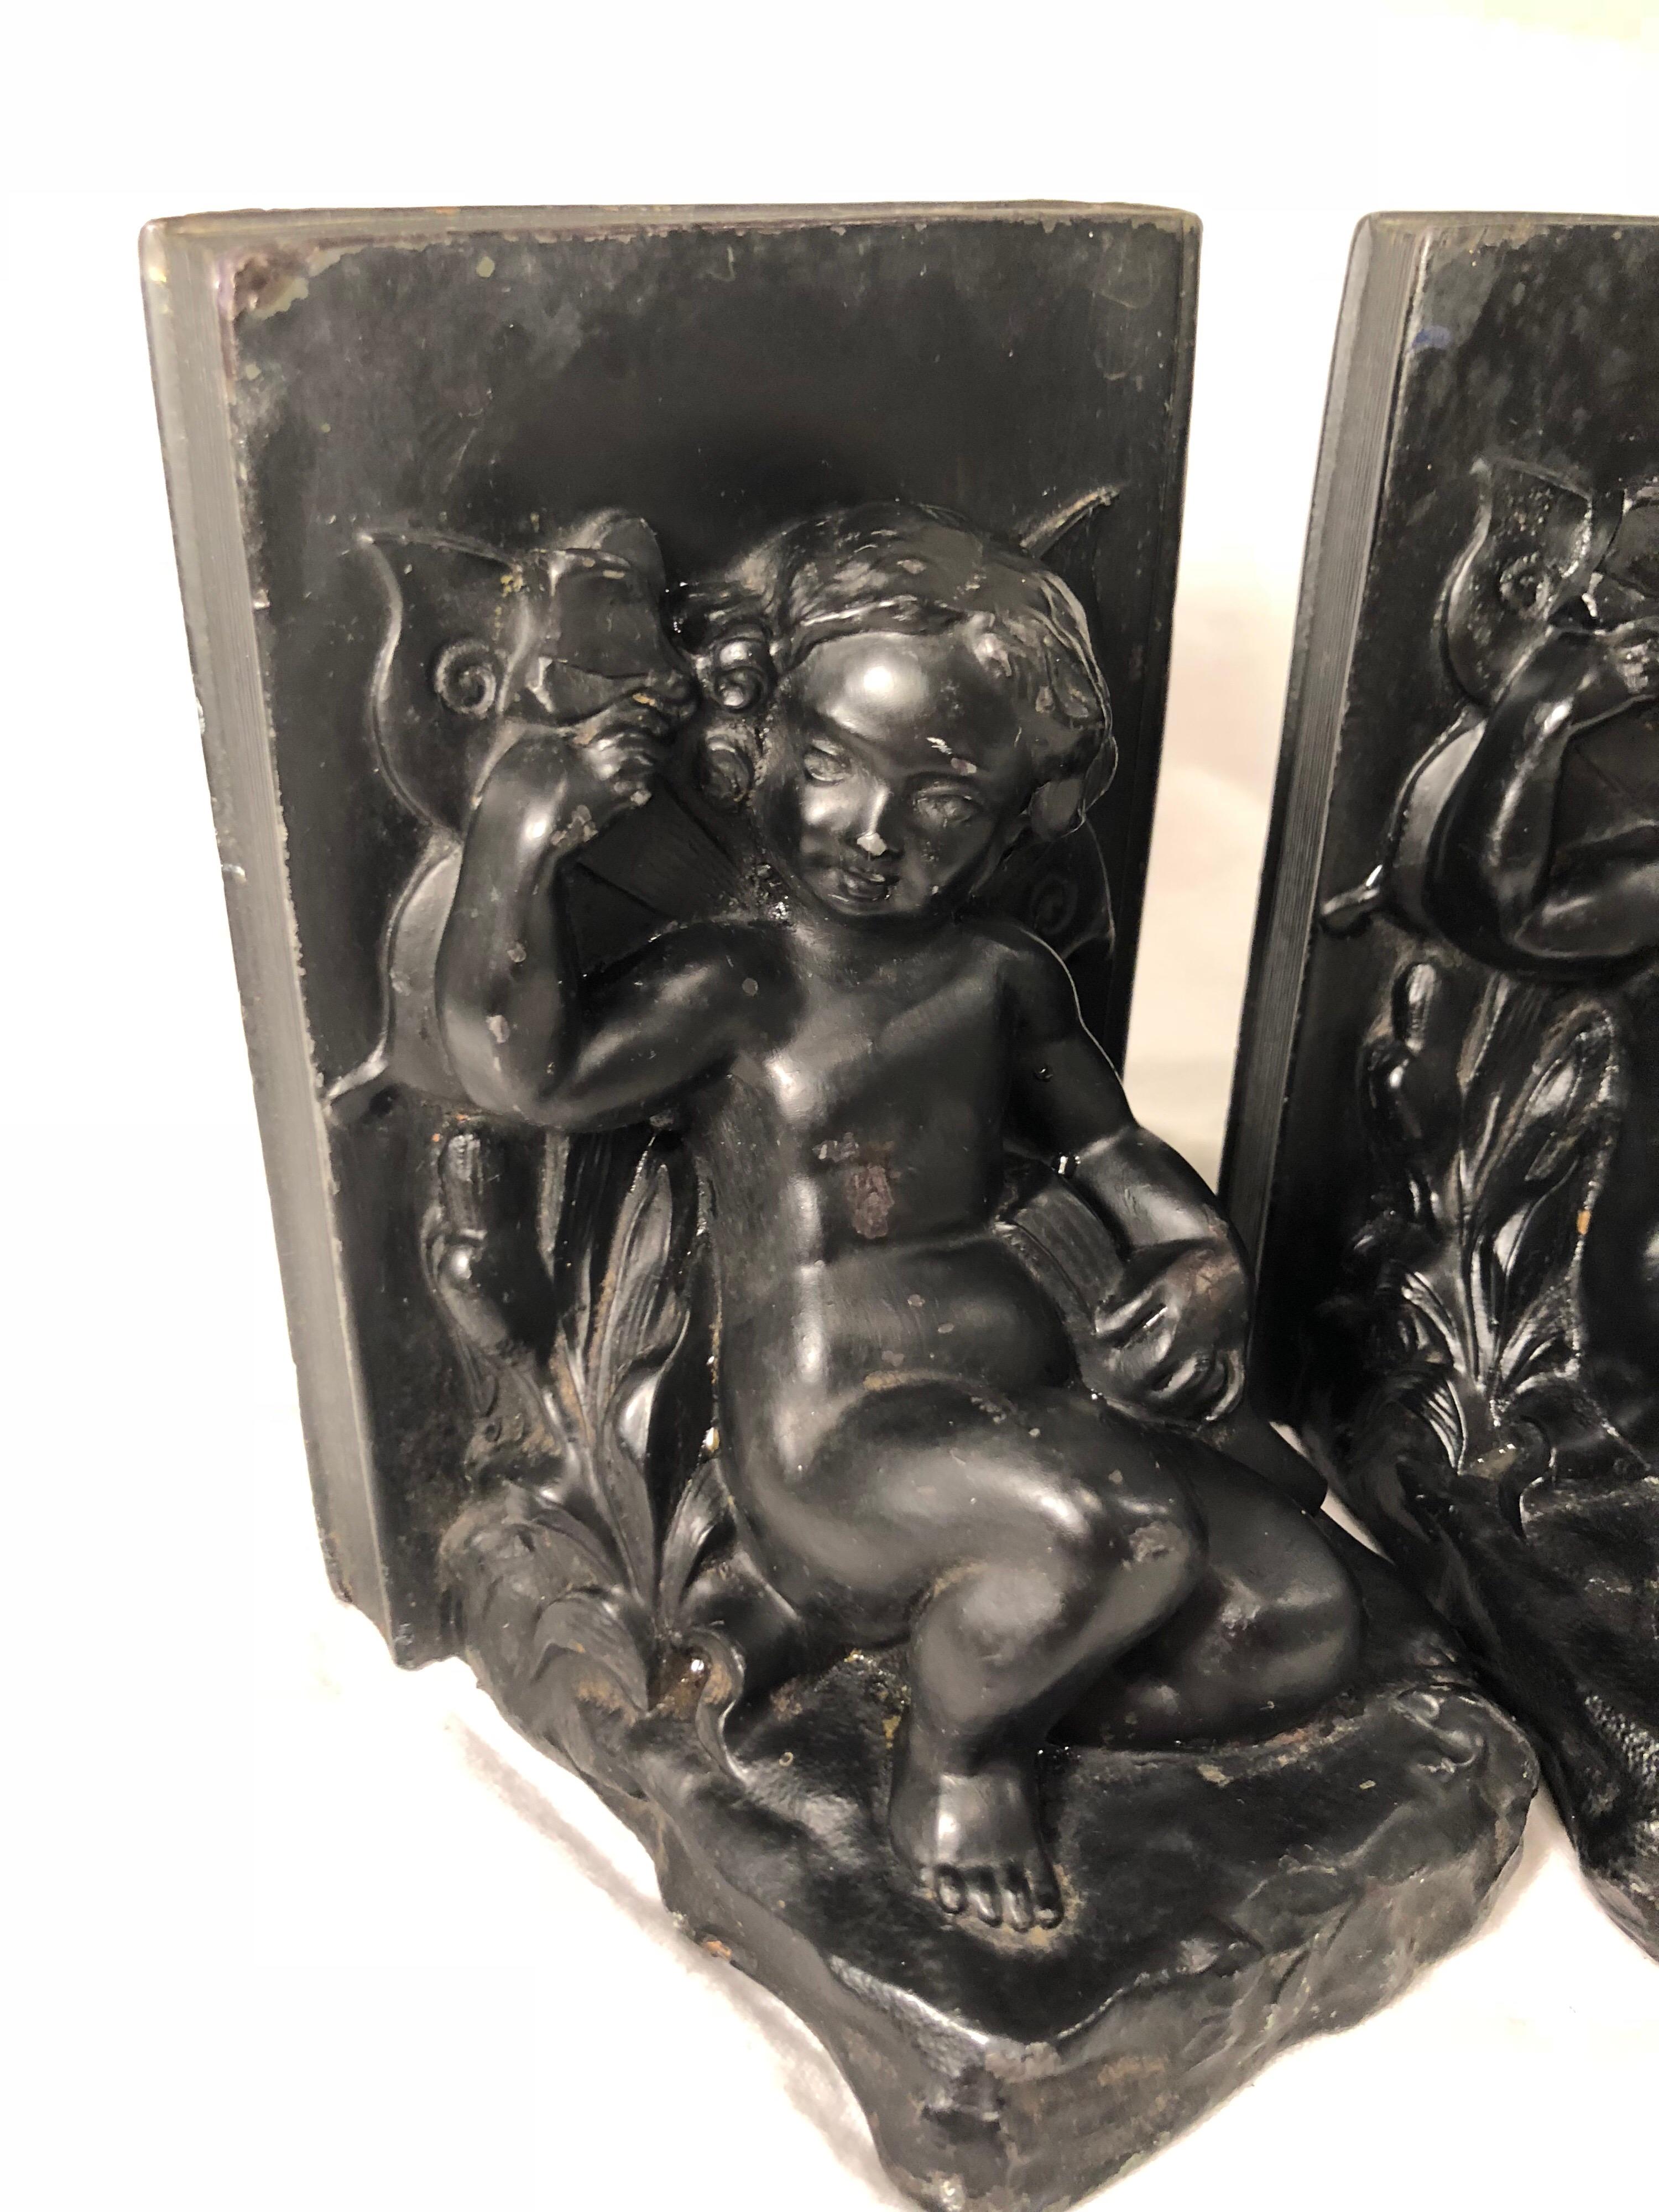 Pair of Cherub bookends. Made of black metal and of the Victorian time period. Price is for the pair.